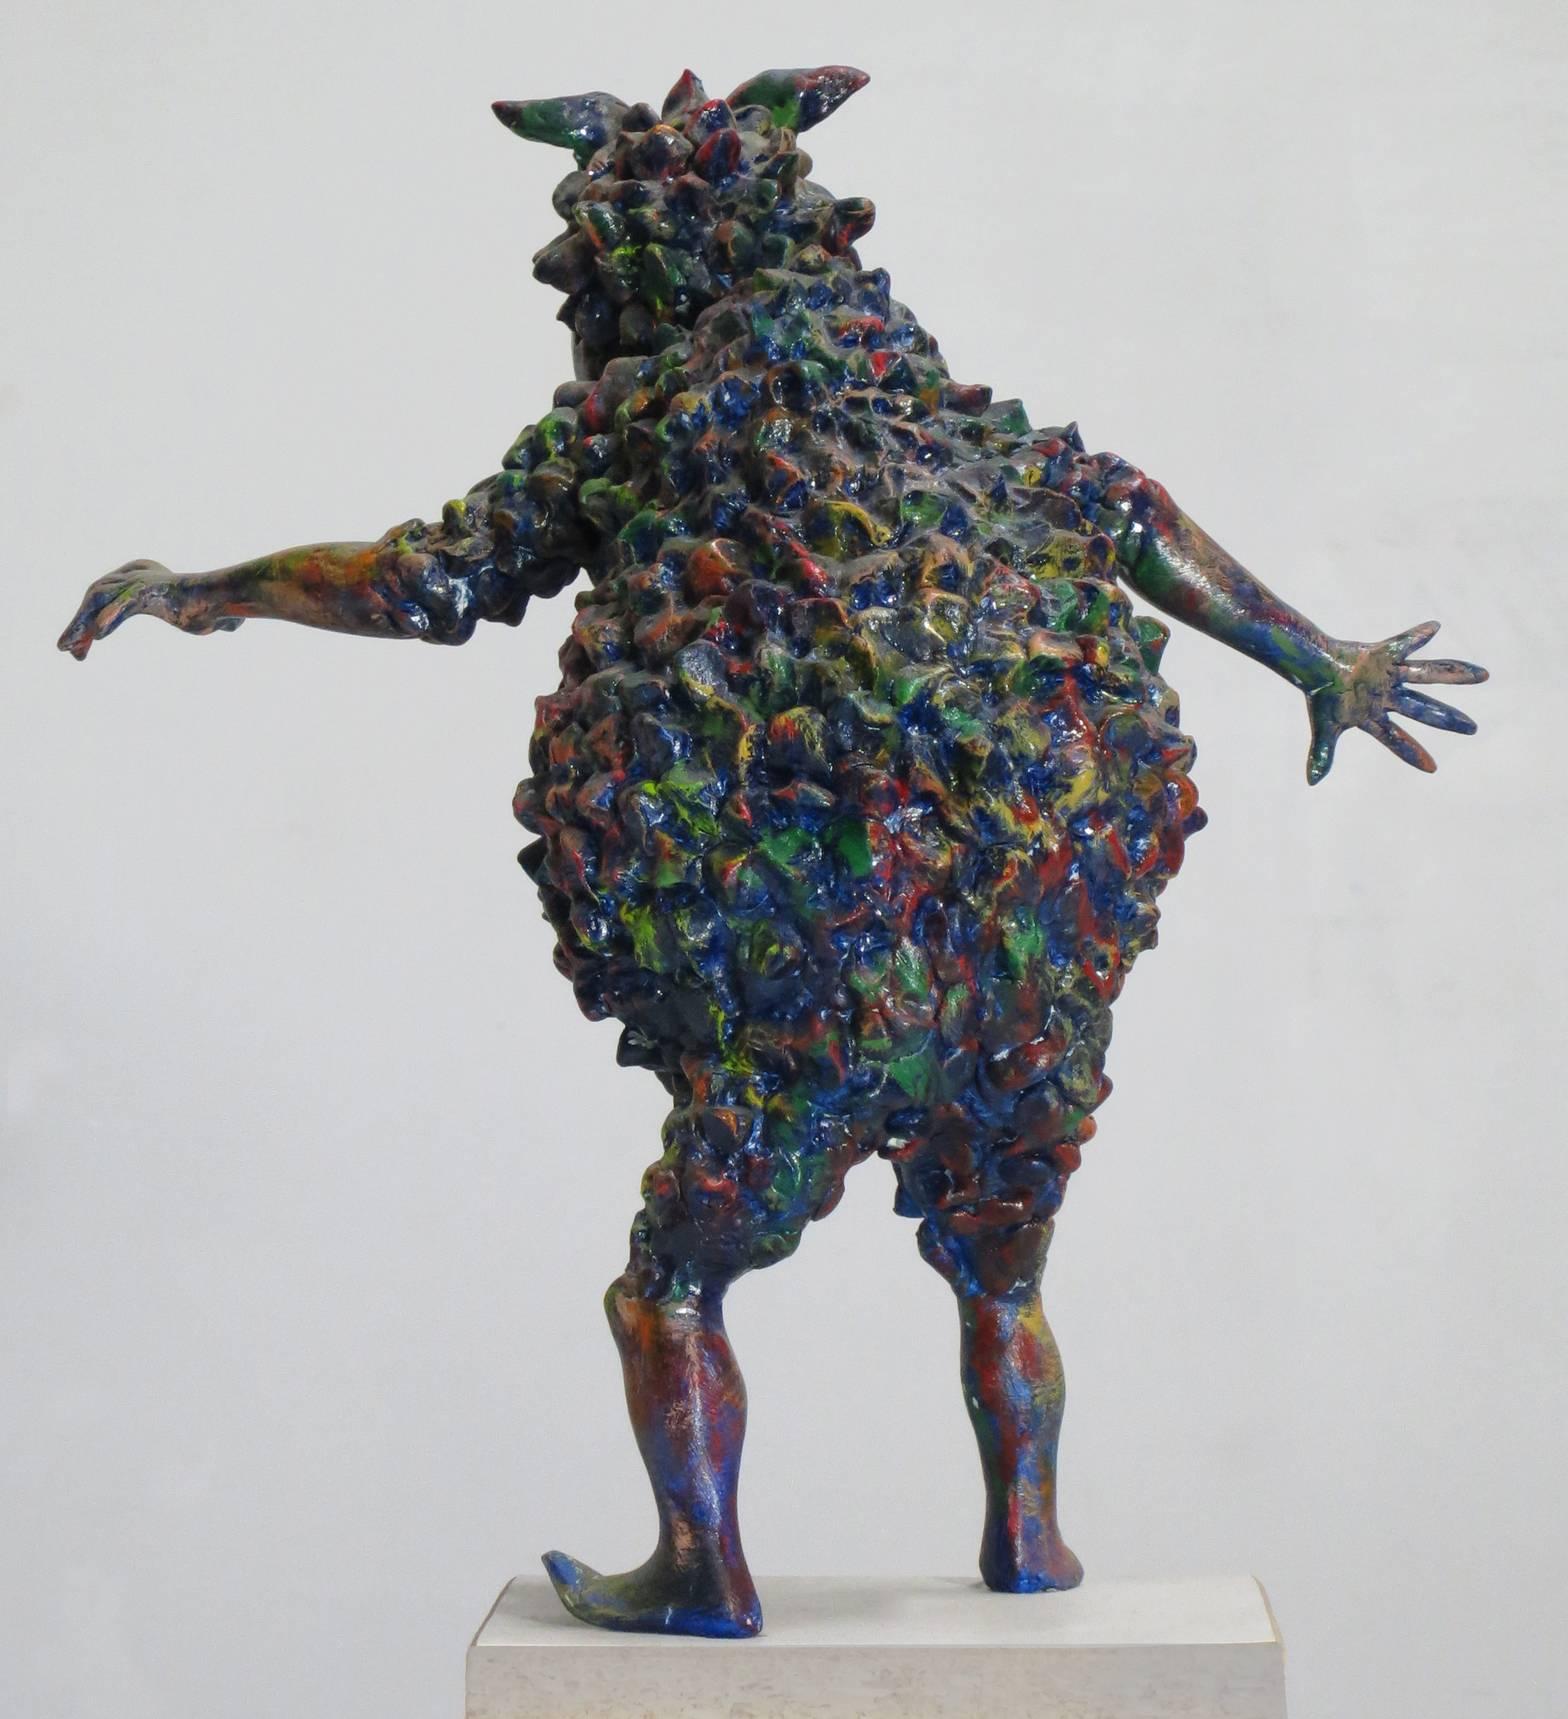 “Small Rigoletto”, jester of Verdi opera, romps in reds, blues, and greens - Gray Figurative Sculpture by Howard Kalish